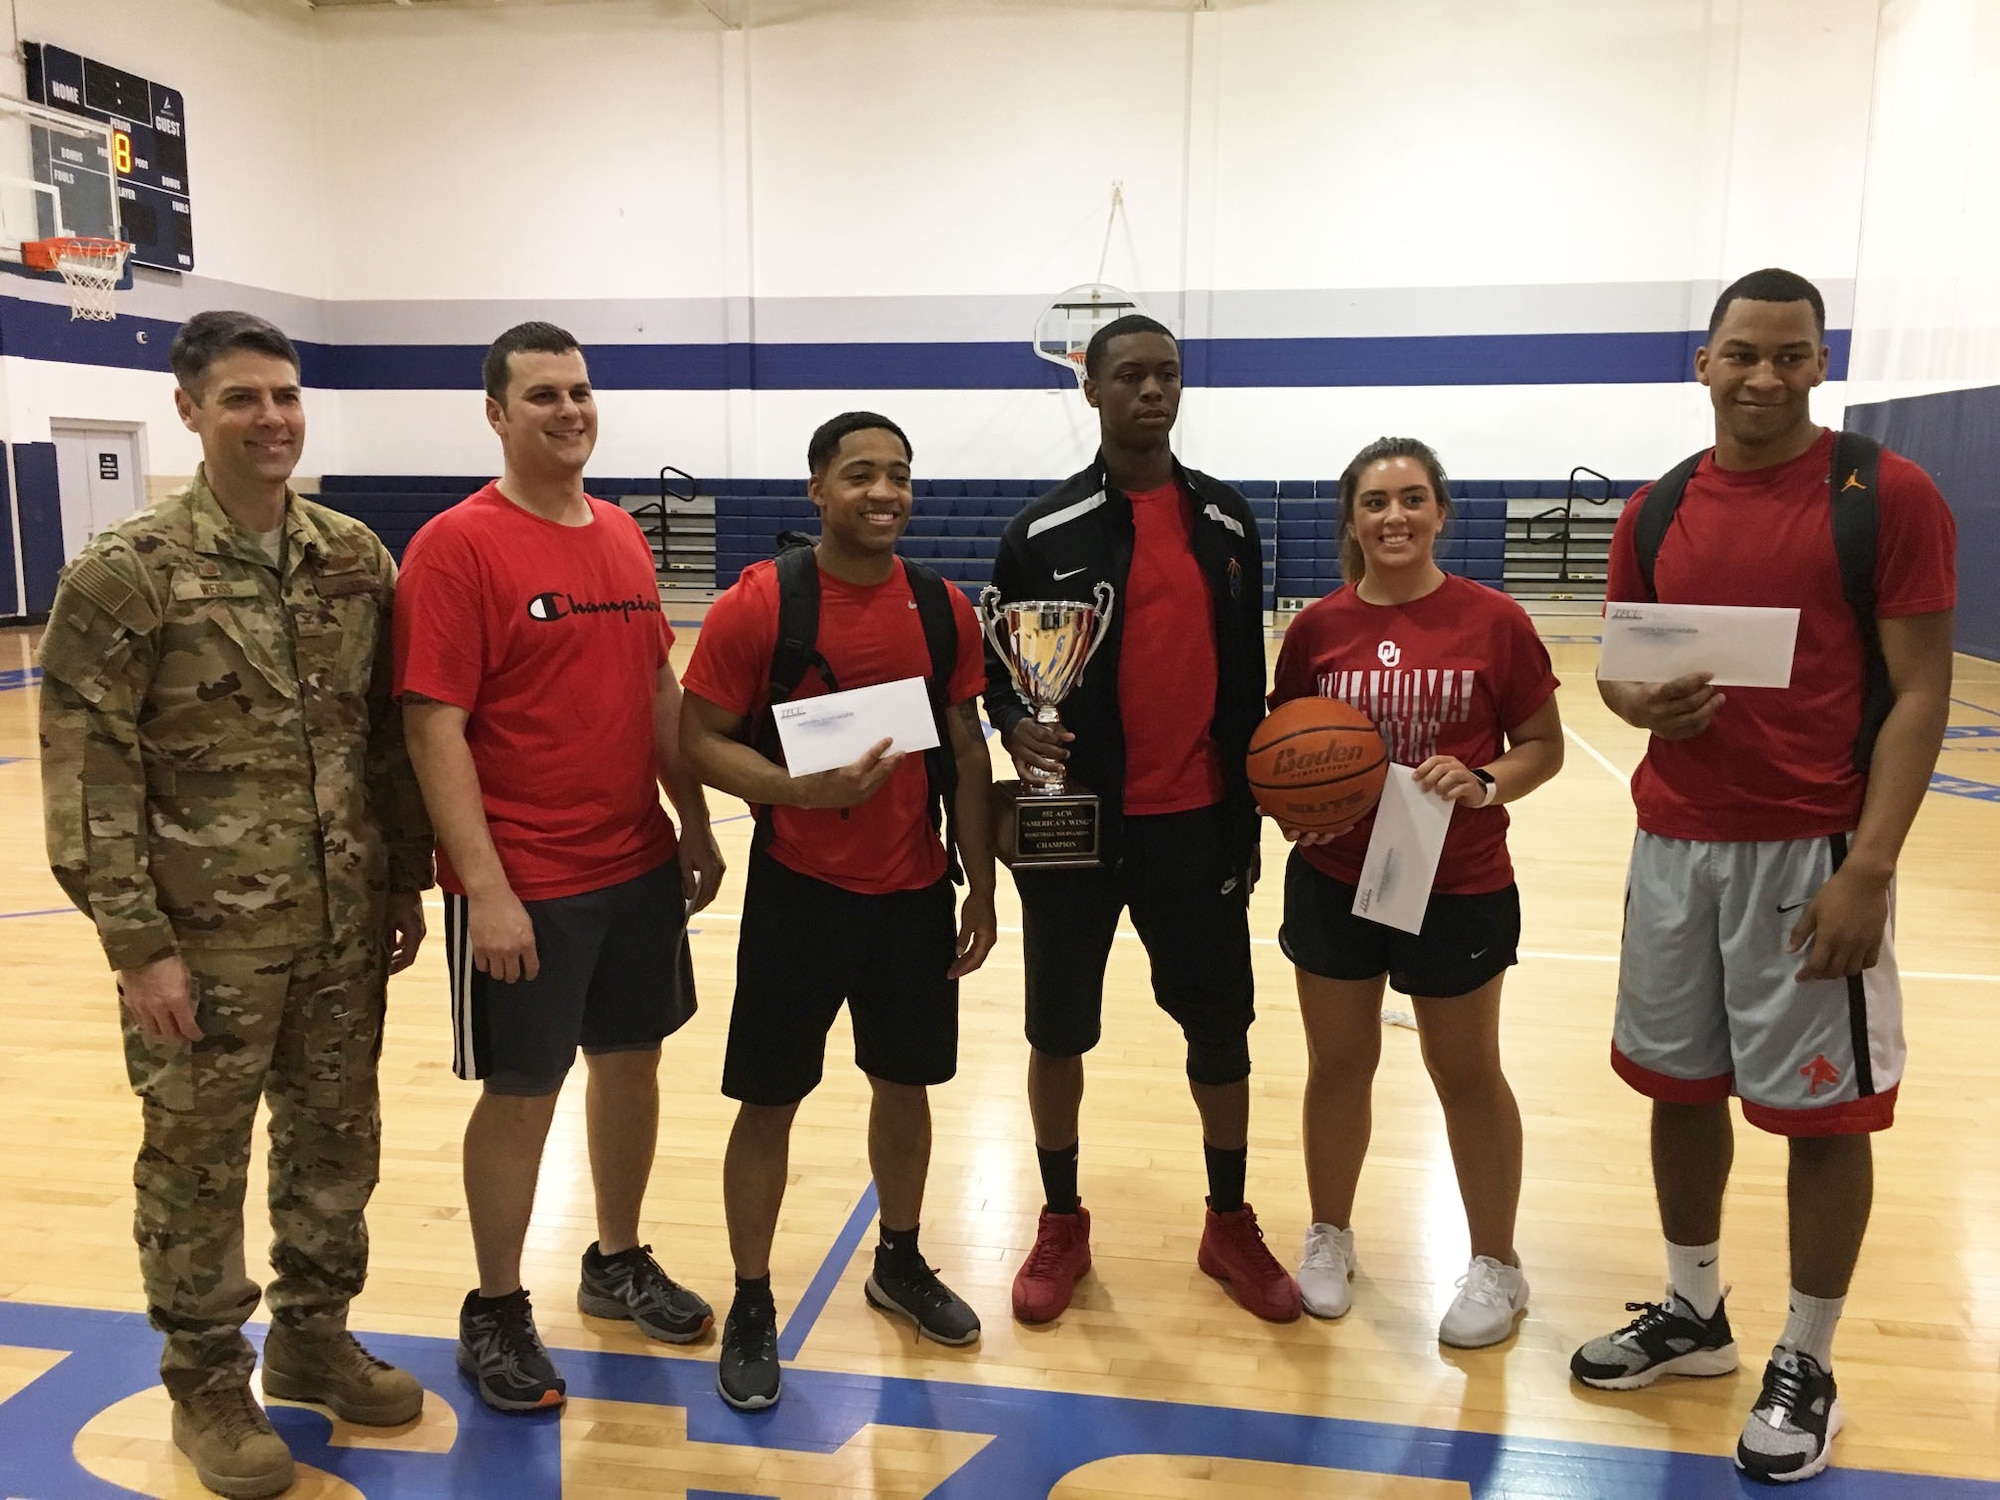 "The Problems" from the 552nd Operations Support Squadron took home the title in the 2nd Annual America's Wing March Madness 3-on-3 basketball tournament. This year teams from the 552nd Air Control Wing, 552nd Maintenance Group, 552nd Maintenance Squadron, 552nd Aircraft Maintenance Squadron, 552nd Operations Support Squadron, 72nd Air Base Wing and the 72nd Aerospace Medical Squadron competed for the title. 

Team members of "The Problems" were Tech. Sgt. Chadrick Newton, Senior Airman Breylon Jordan, Airman Navaughn Kearse, Airmen 1st Class Sarah Feathers and Dorian Flowers and Tech. Sgt. Charles Bailey.